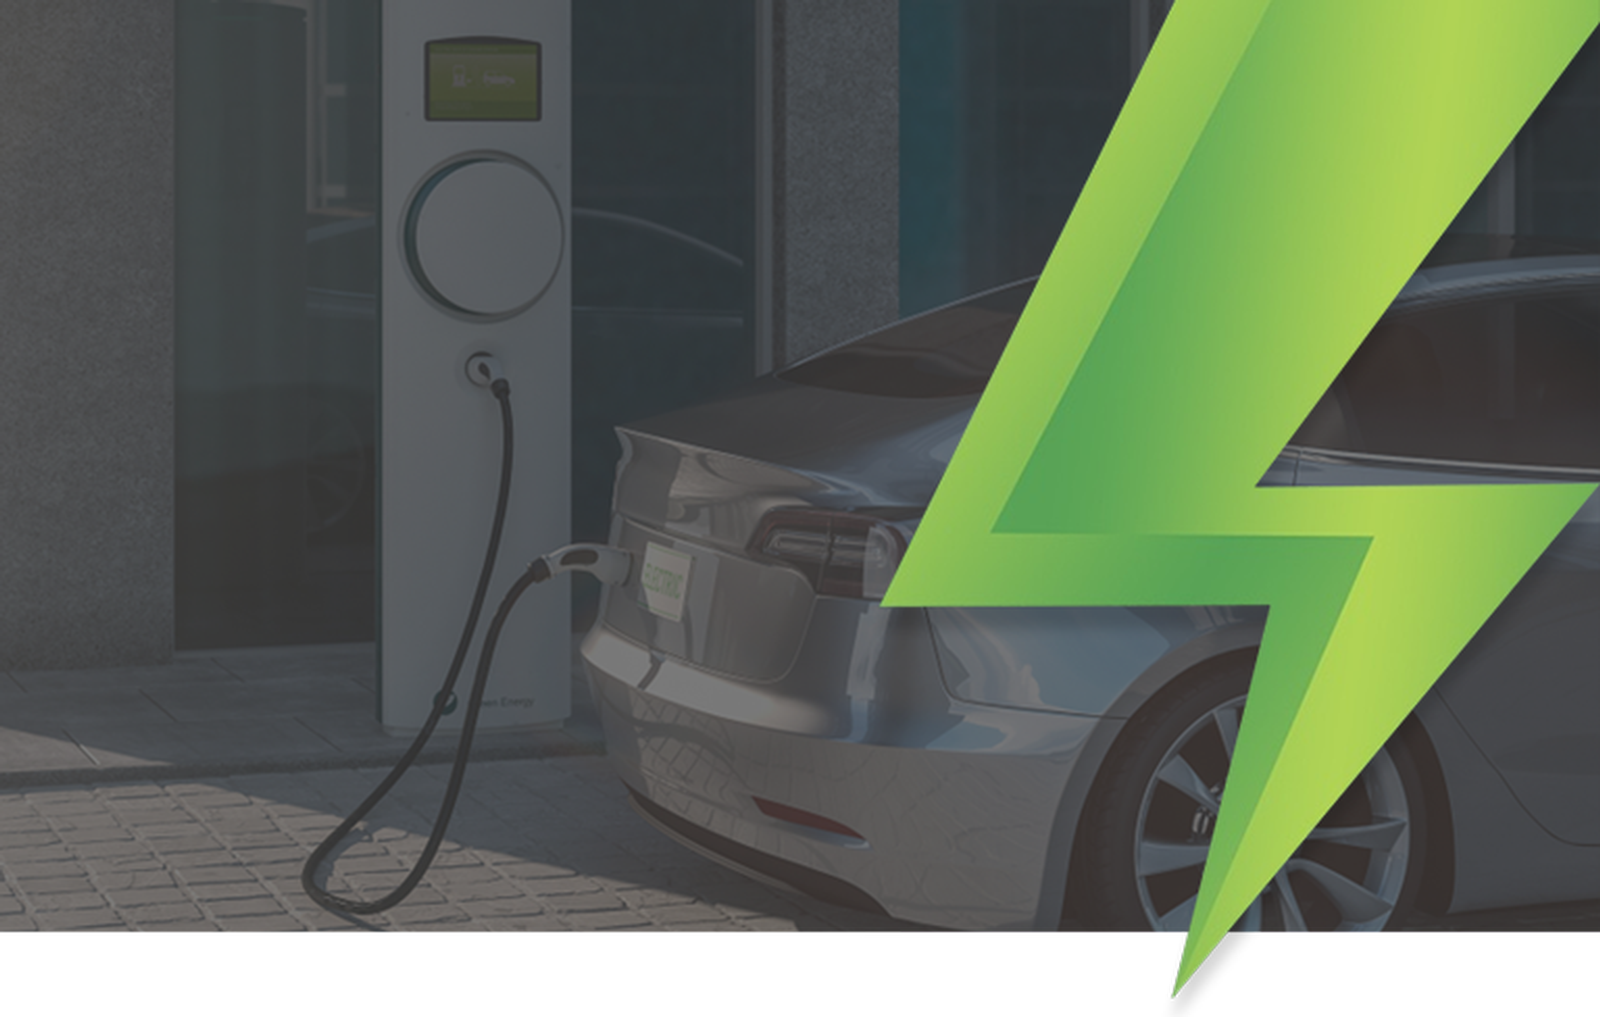 Electric Vehicle Charger Installation Services by Experienced Electrician from Delray Electric Ltd. in Morinville